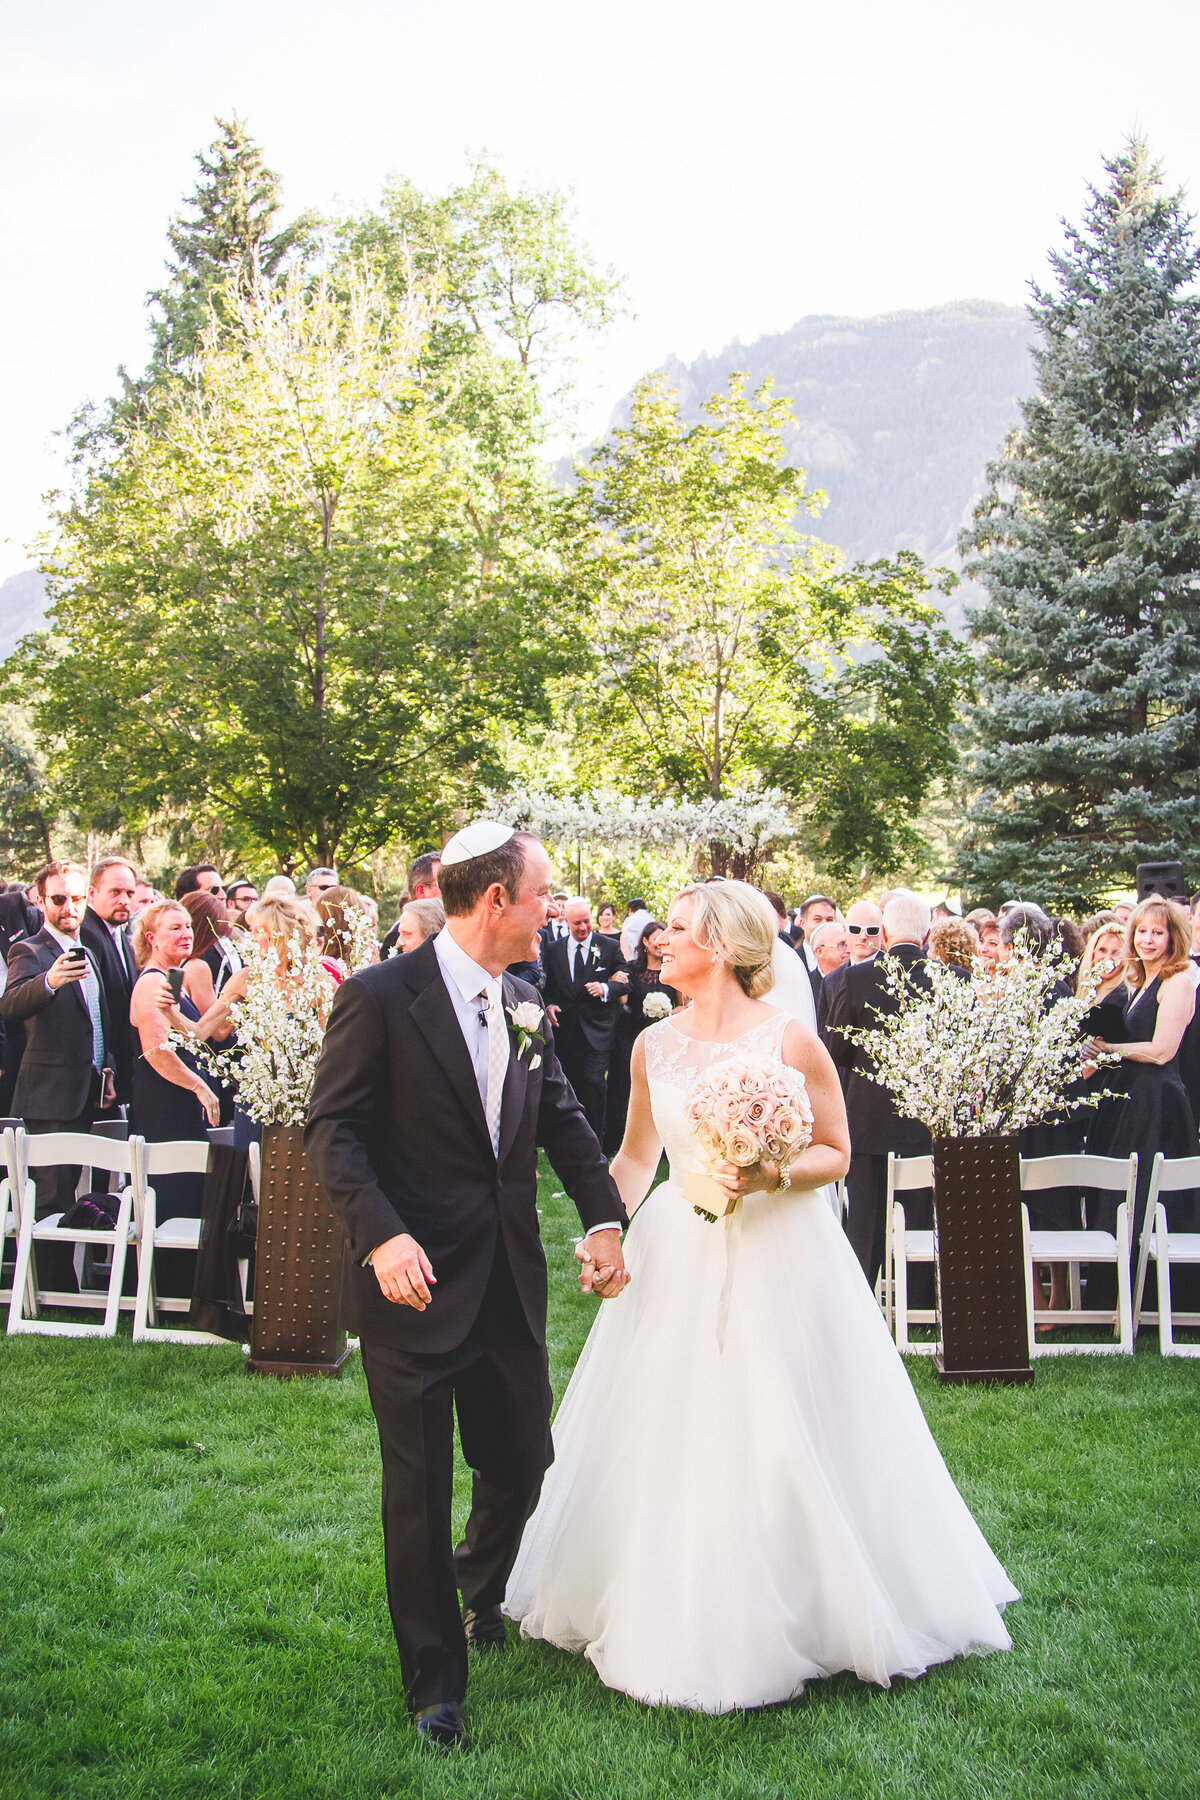 Just Married on the West Lawn, Broadmoor, Colorado